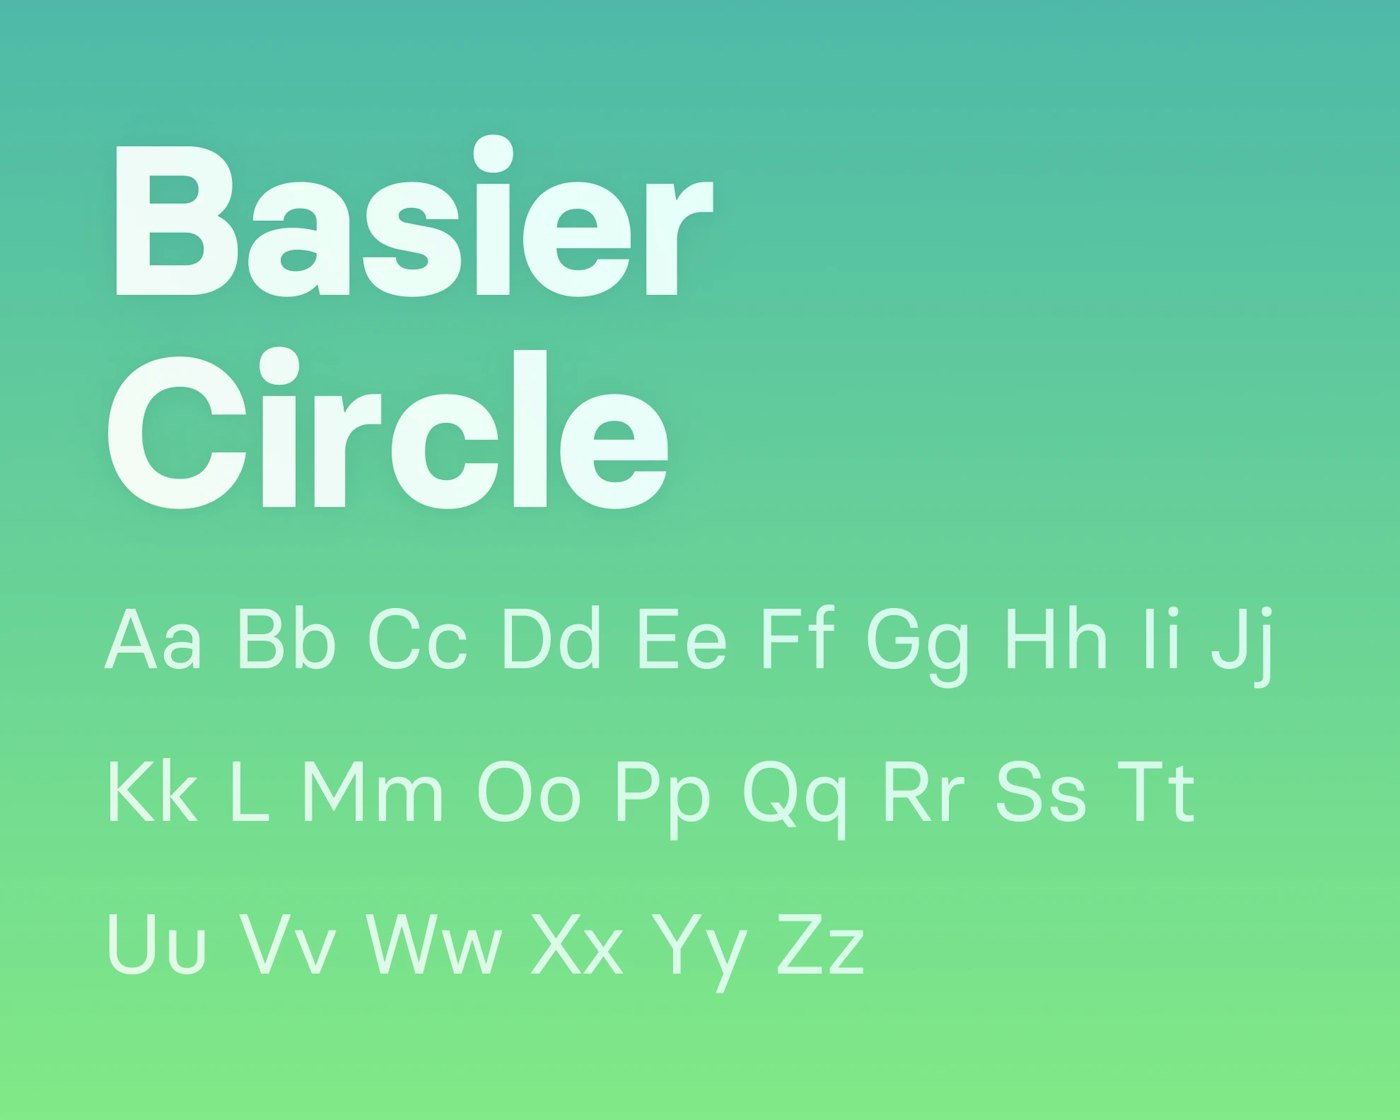 Very light green text that reads ‘Basier Circle’ followed by pairs of alphabet letters. All text is placed on a green to turquoise gradient background.